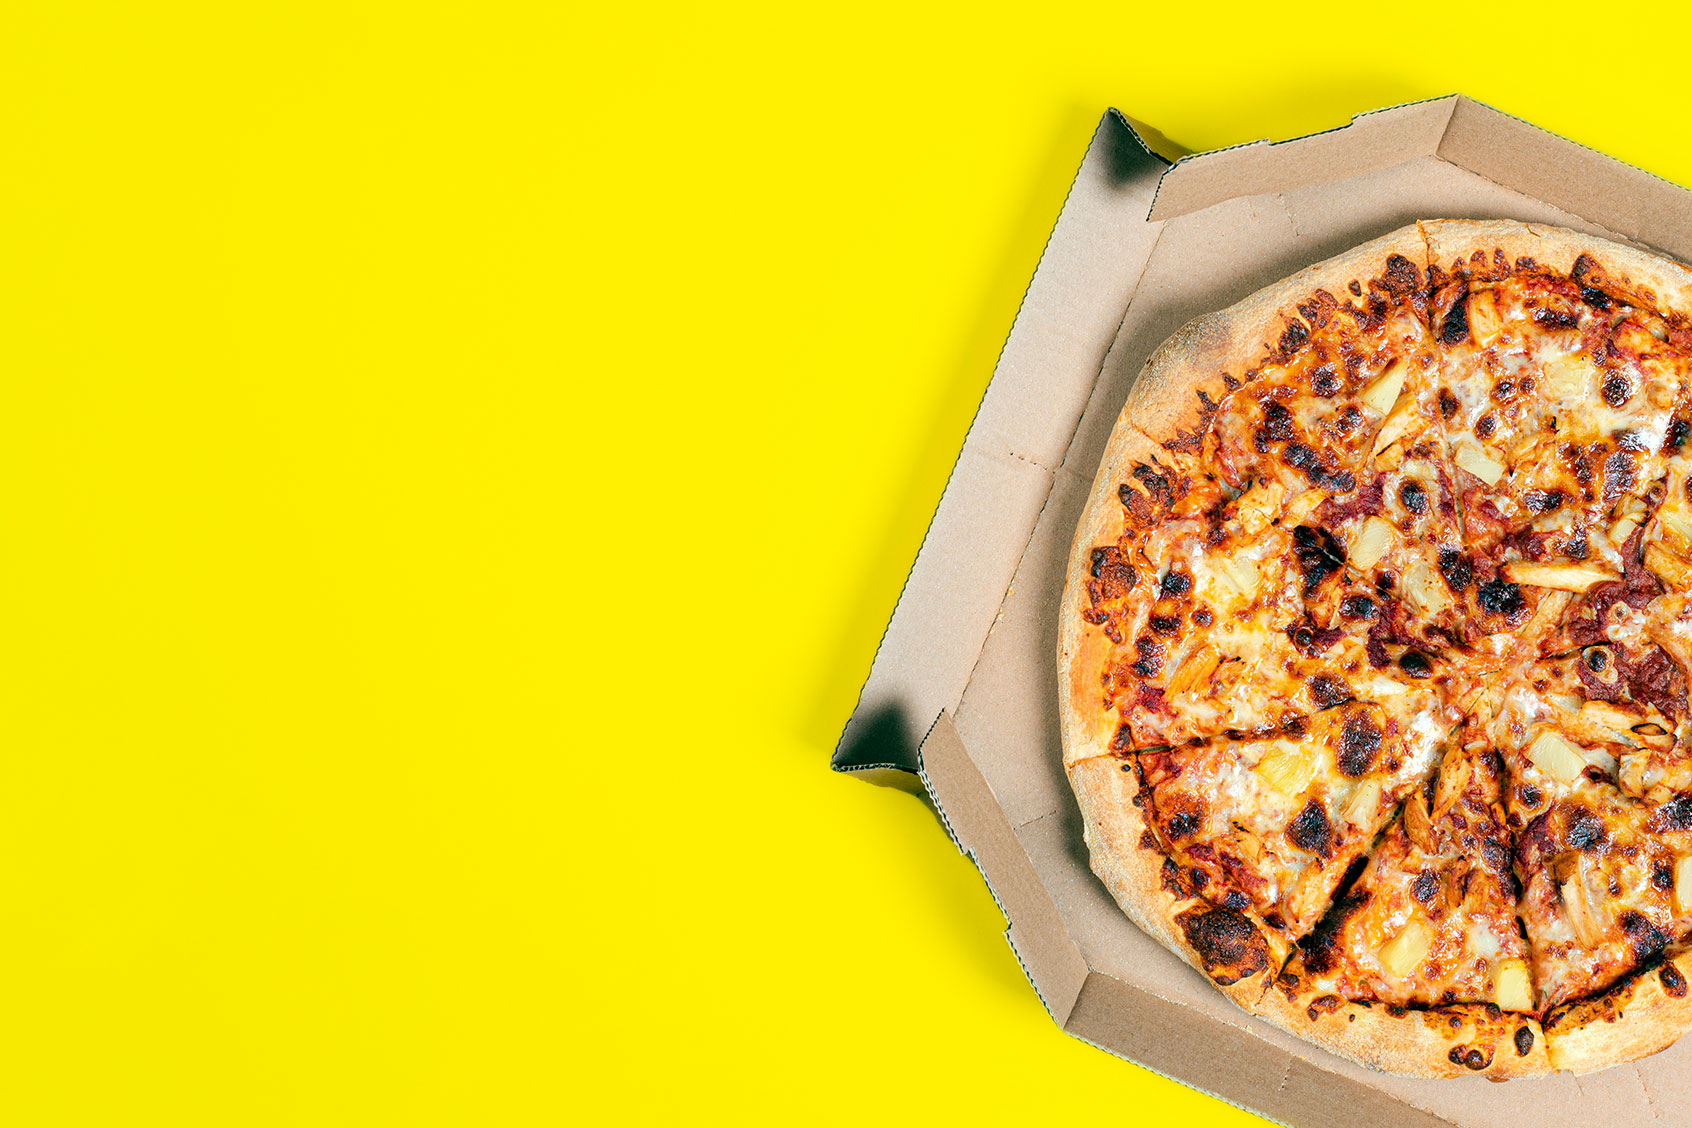 Pineapple haters are wrong: You should eat even more fruit on your pizza